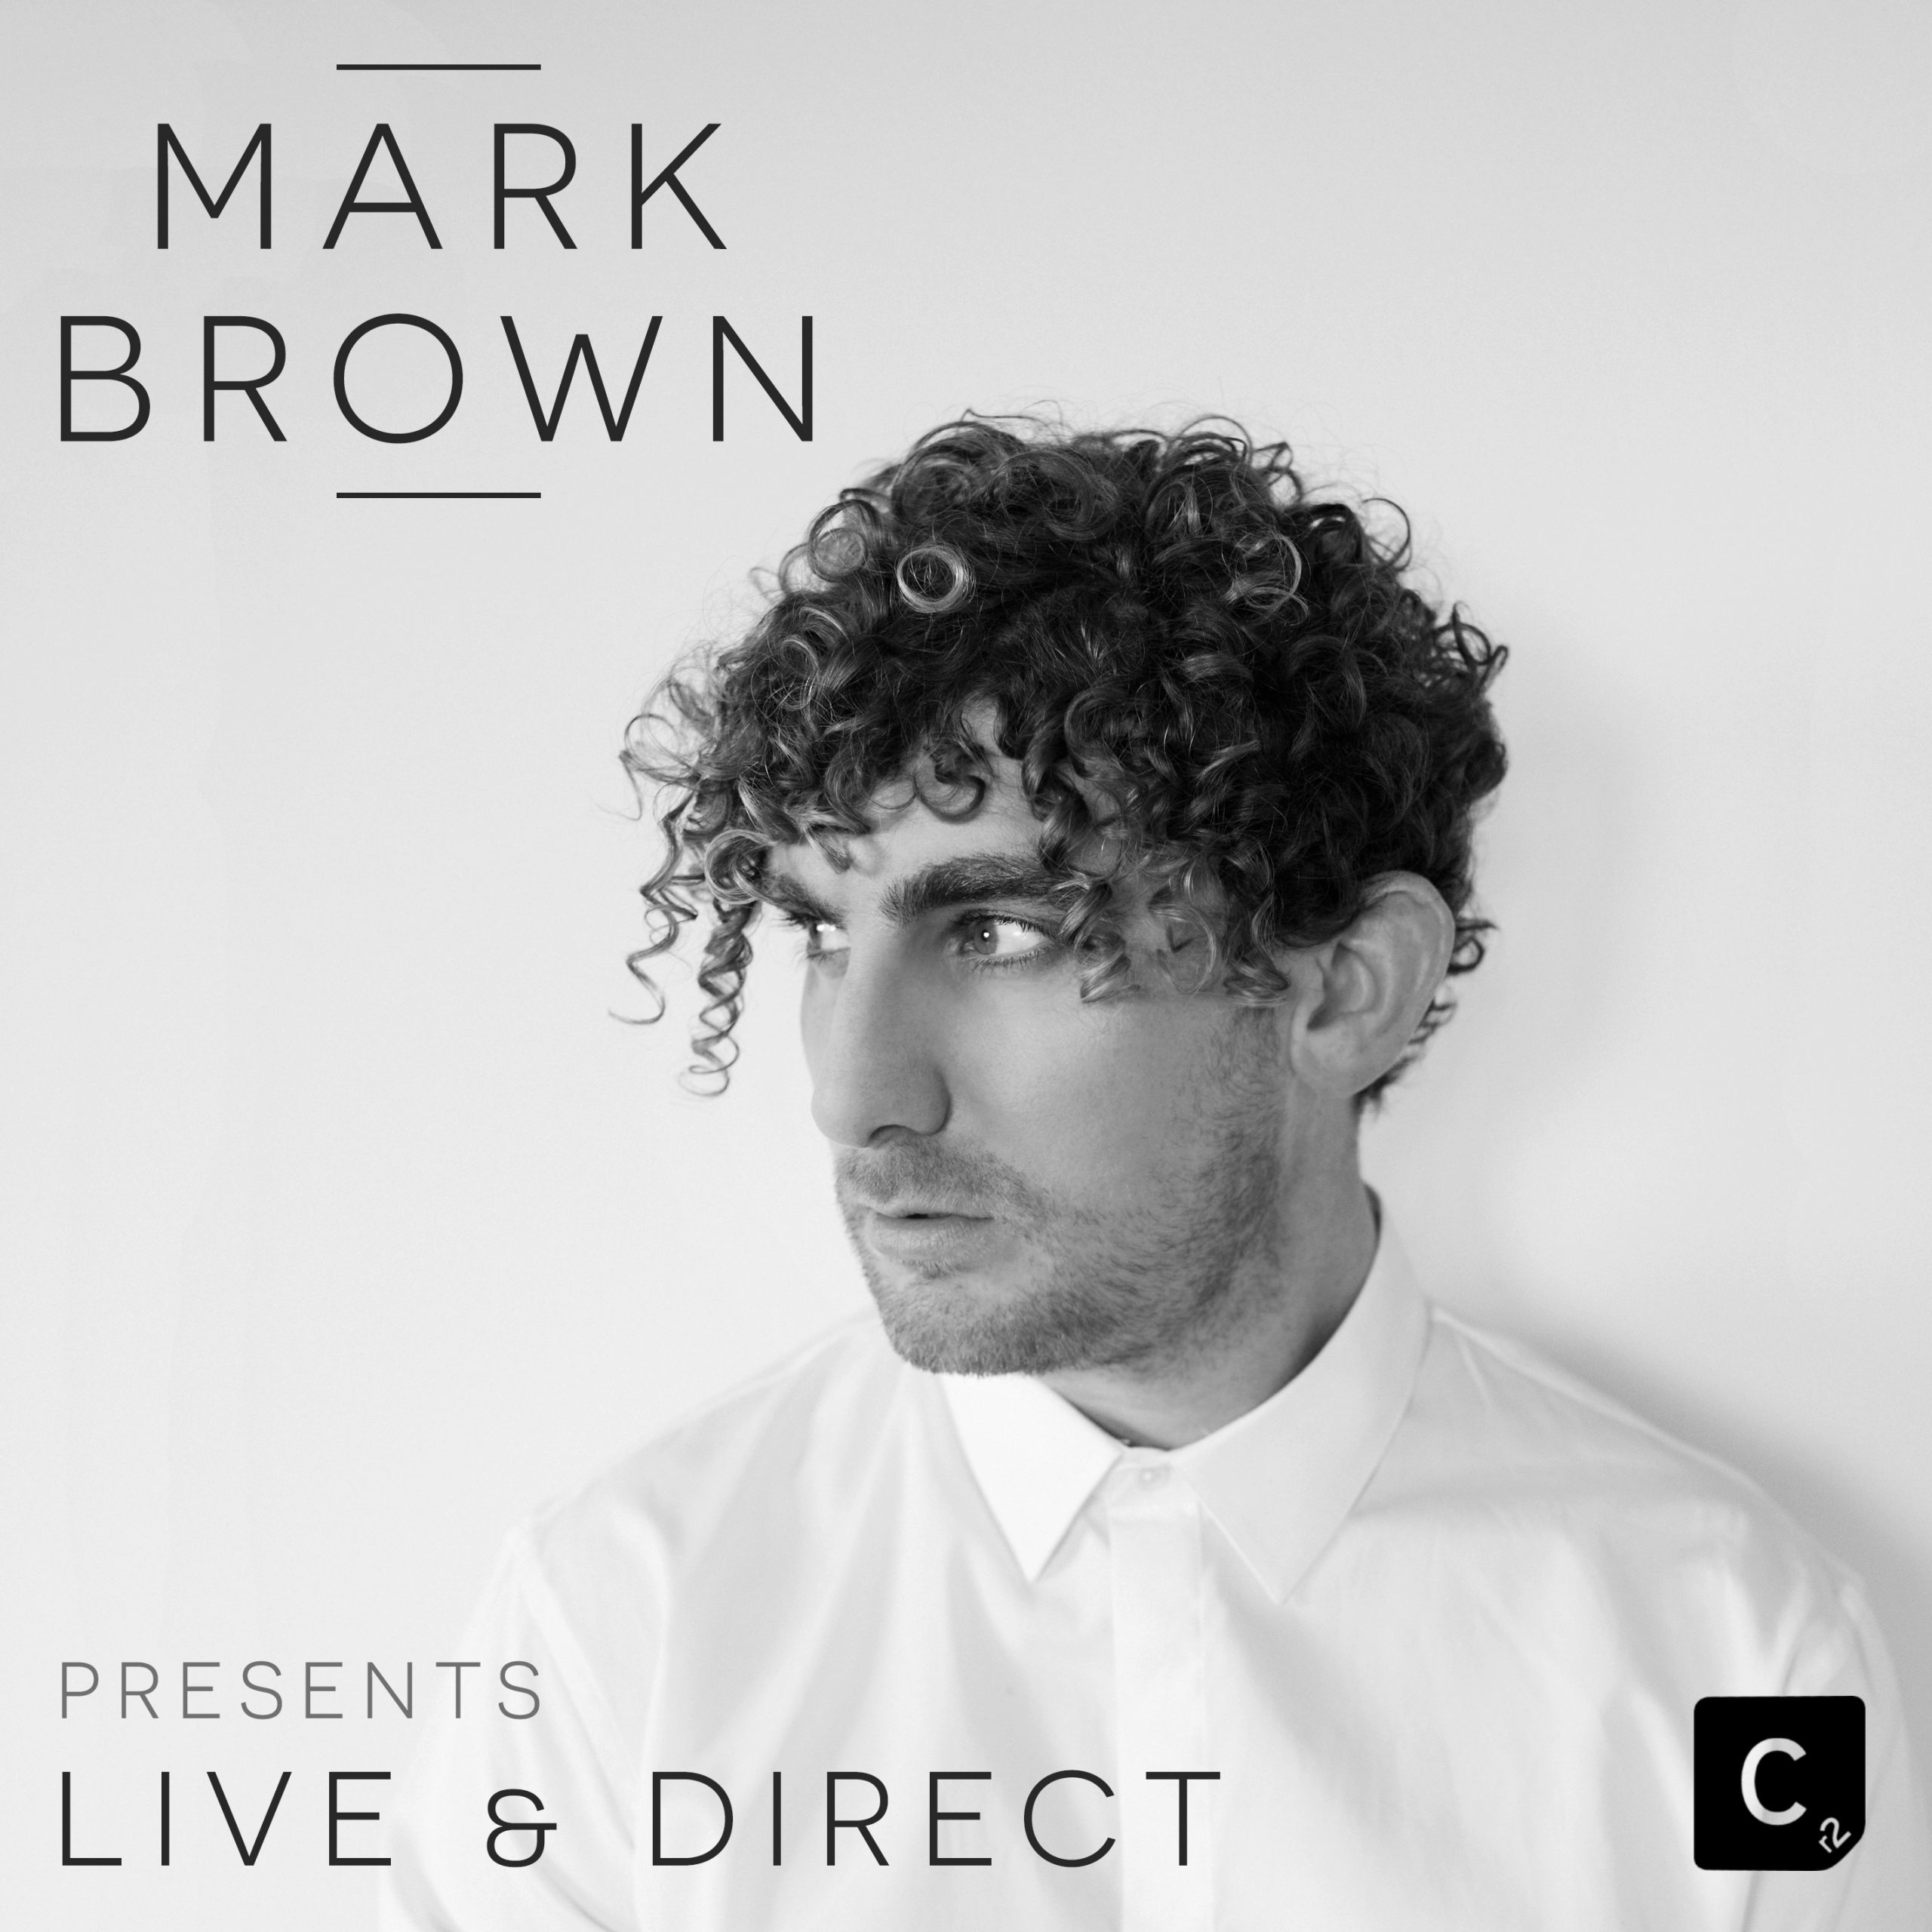 vbp-193181-Mark-Brown-8211-Cr2-Live-038-Direct-Radio-Show-460-8211-8216Best-of-Cr28217-Special